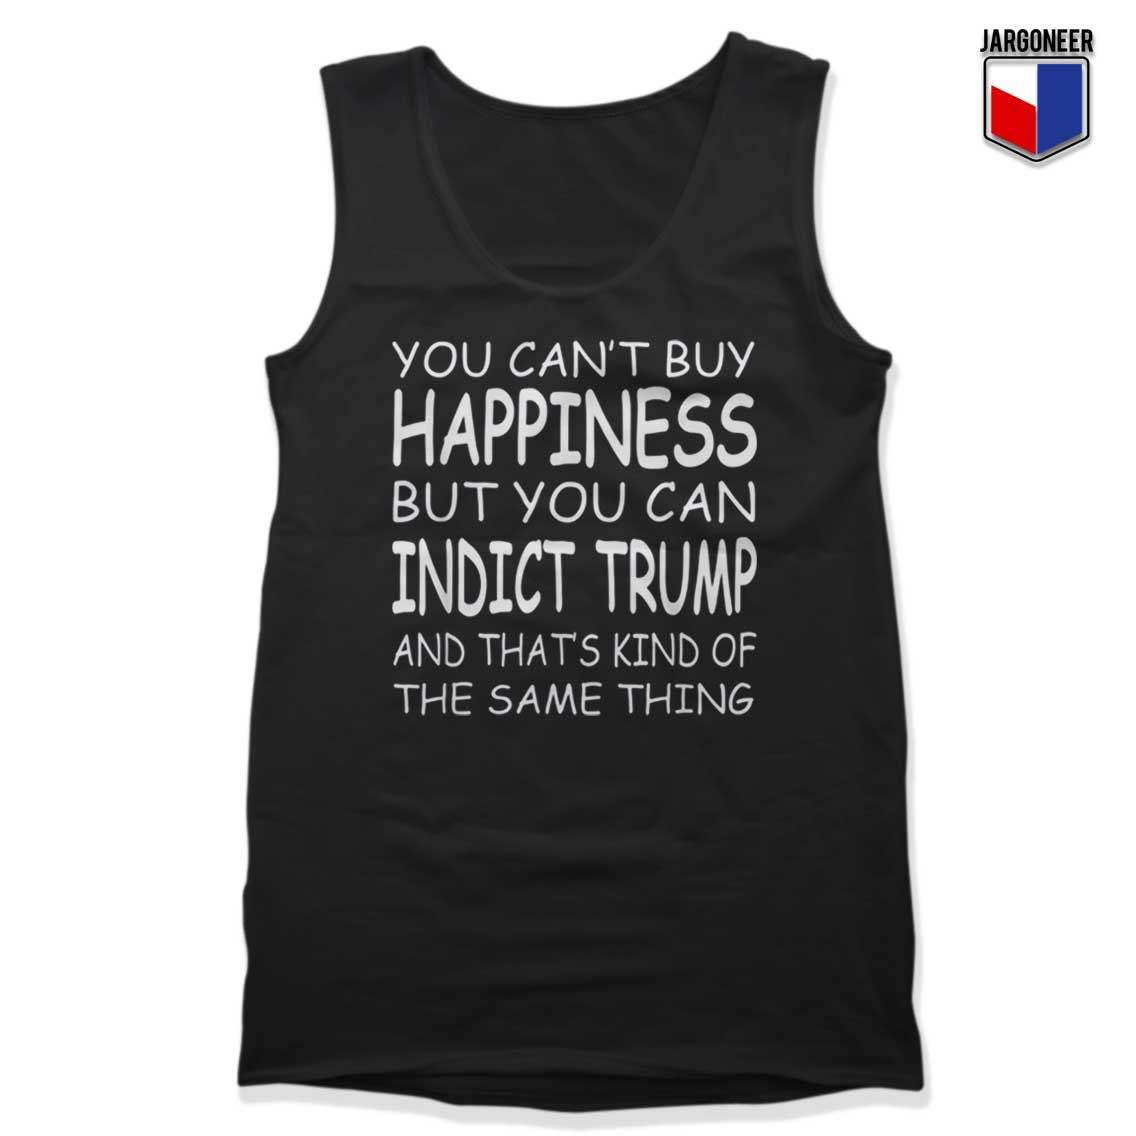 You Cant Buy Happiness Tank Top - Shop Unique Graphic Cool Shirt Designs